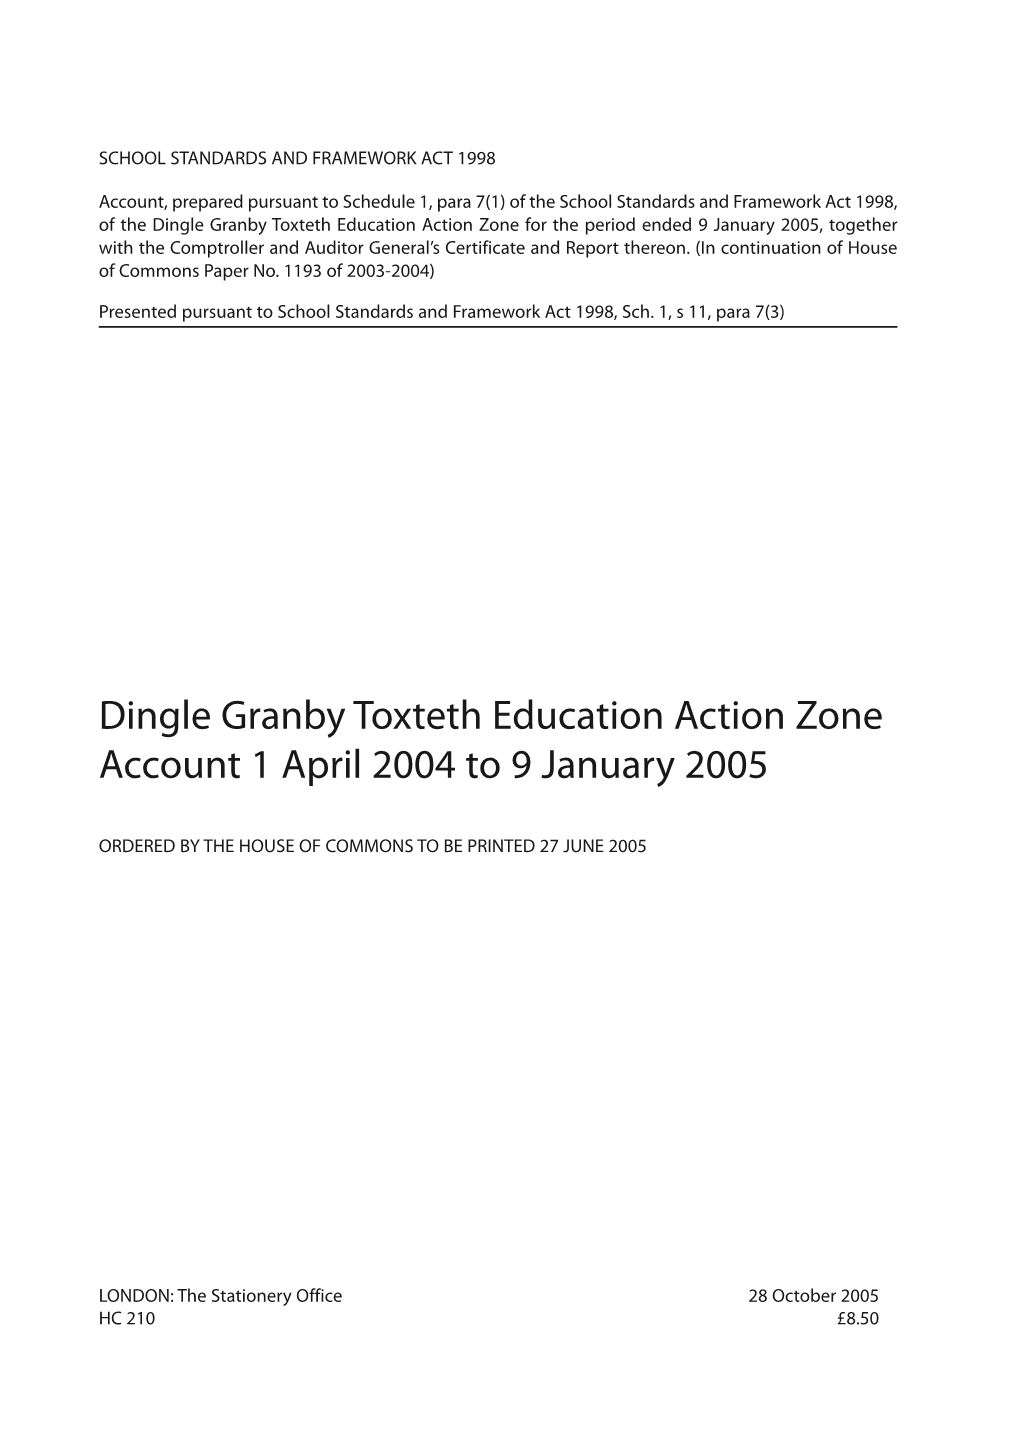 Dingle Granby Toxteth Education Action Zone Account 1 April 2004 to 9 January 2005